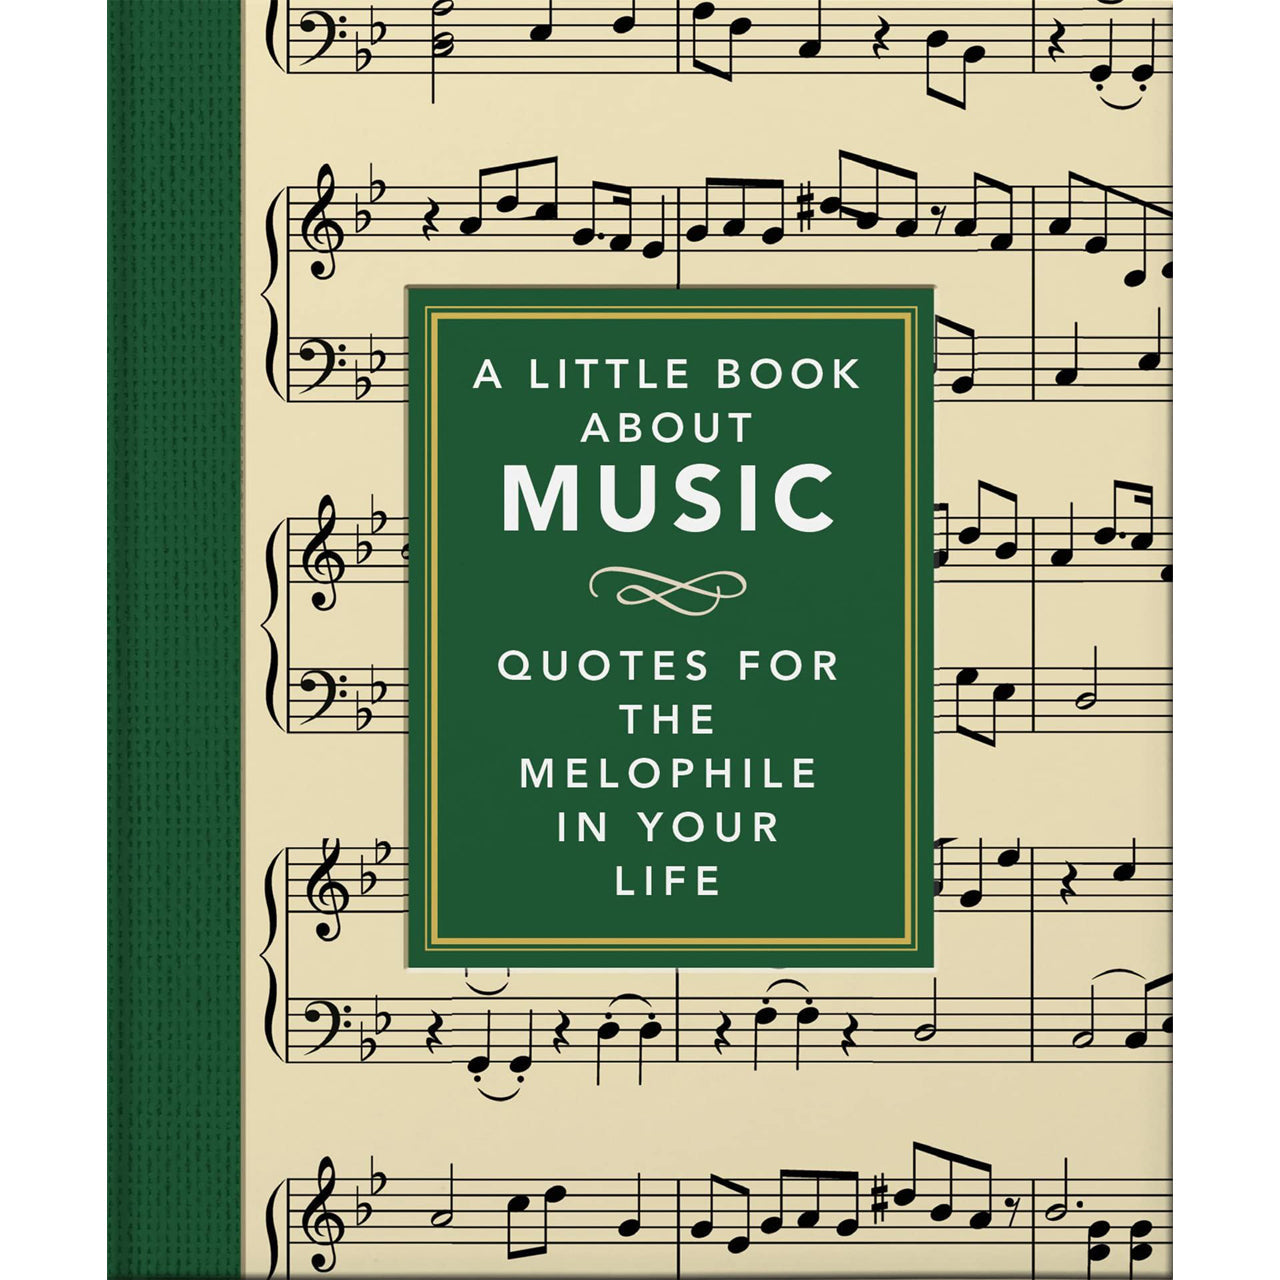 A Little Book About Music. Quotes for the melophile in your life by Orange Hippo Glyndebourne Shop